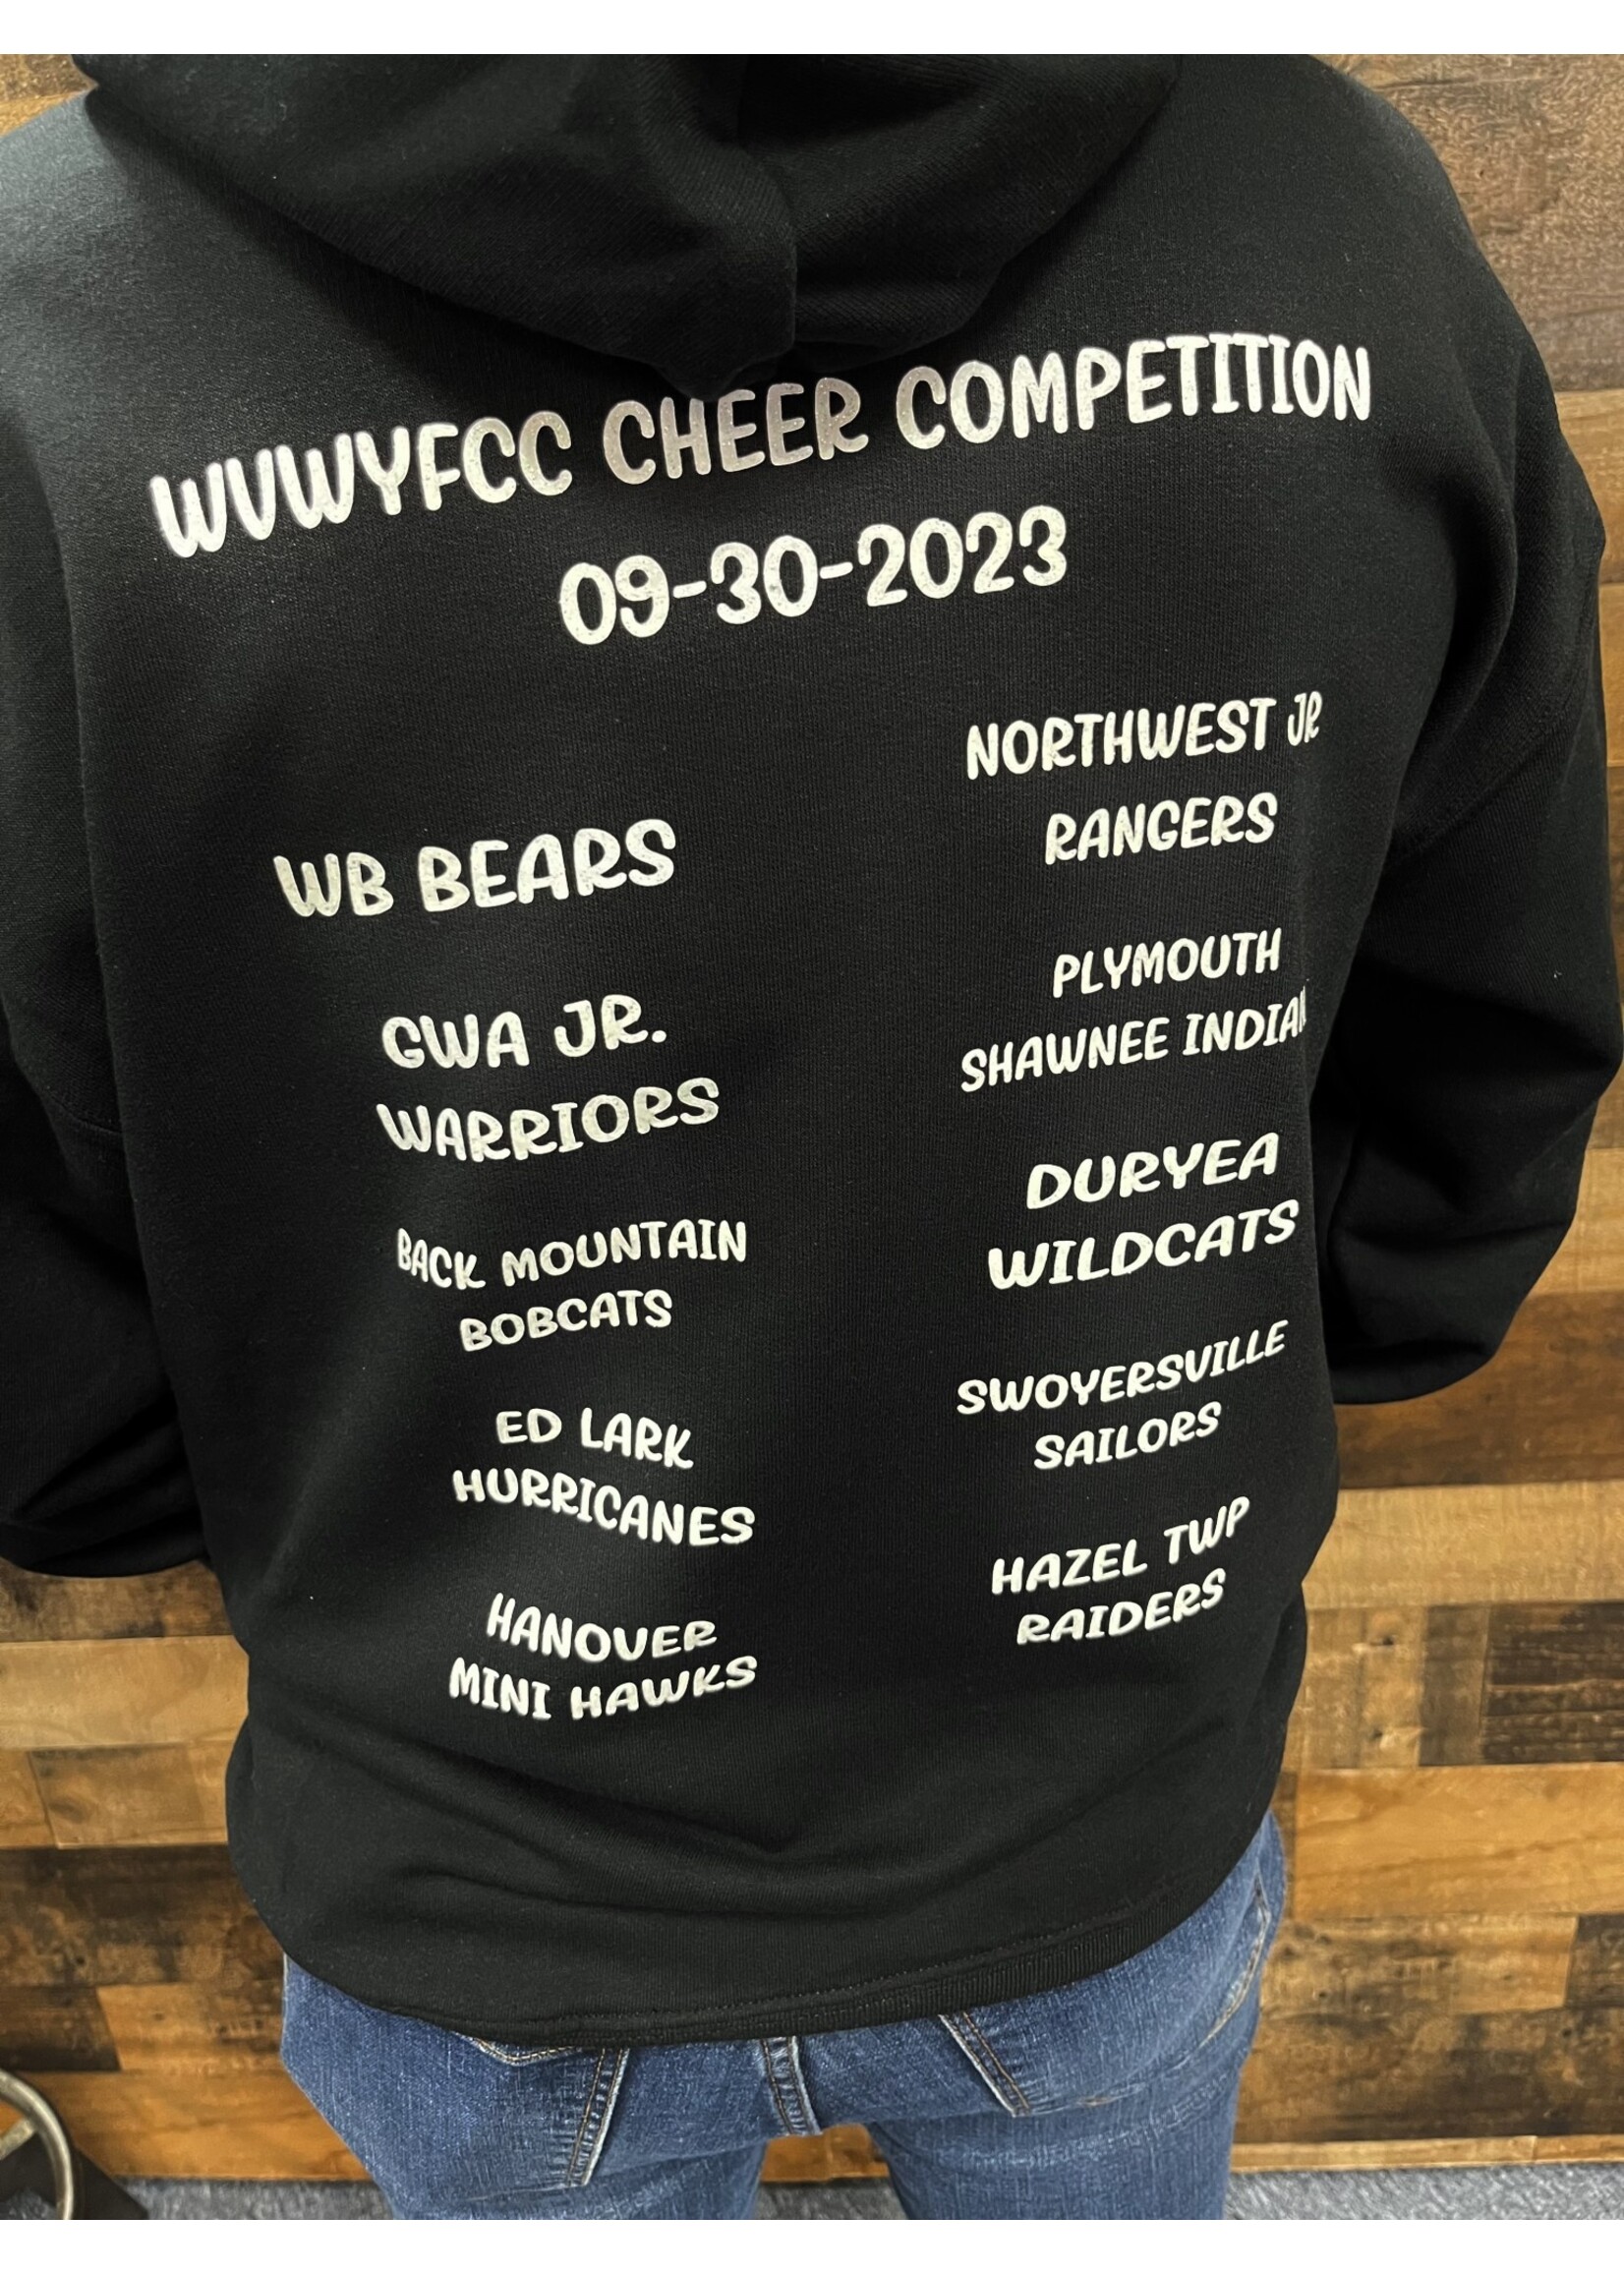 My Heart Beats in 8 counts 2023 Glitter  Cheer Competition Hoodie